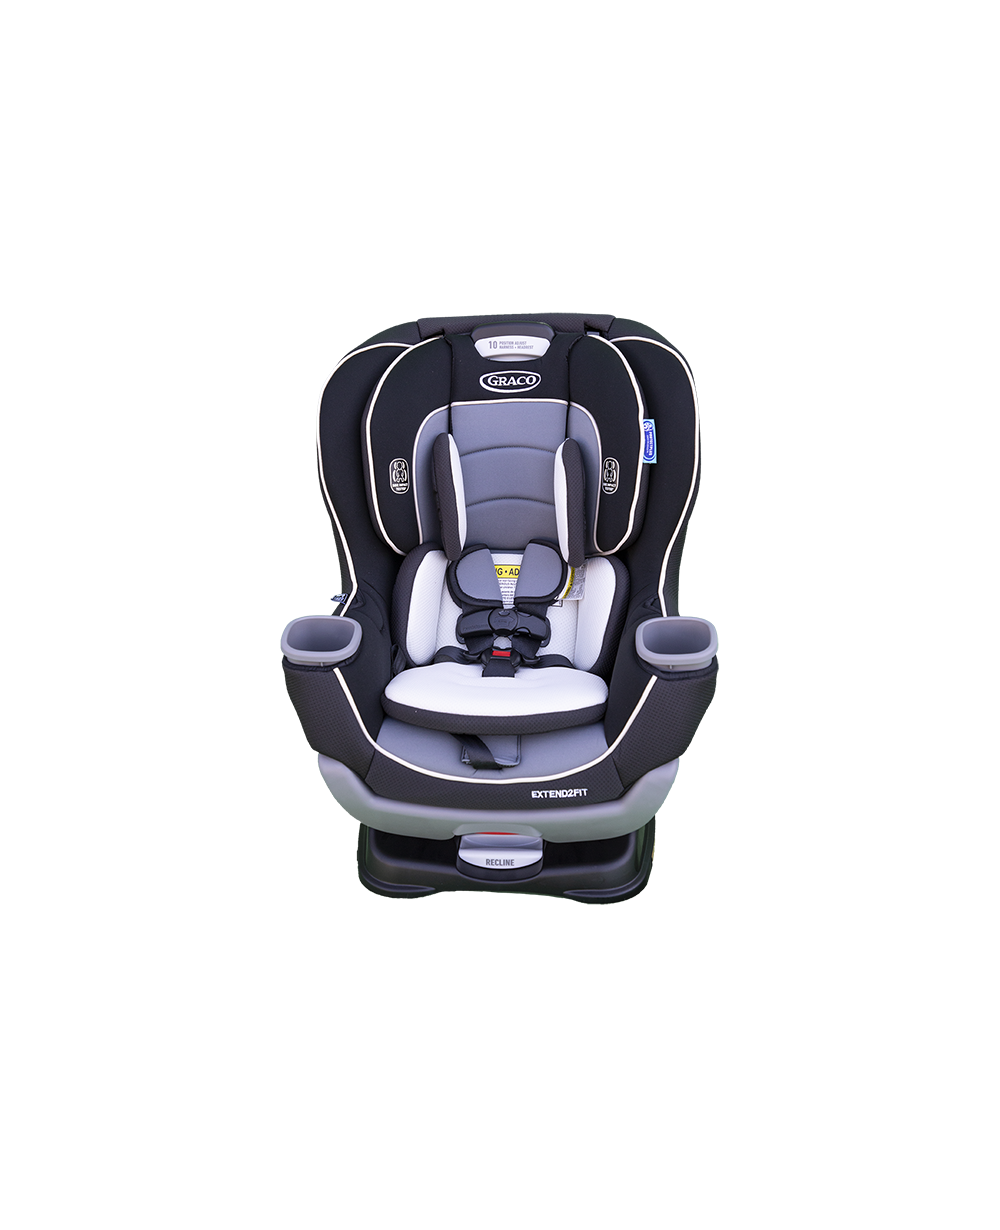 Graco Extend2Fit Convertible Carseat - Bumming Baby Equipment Rentals